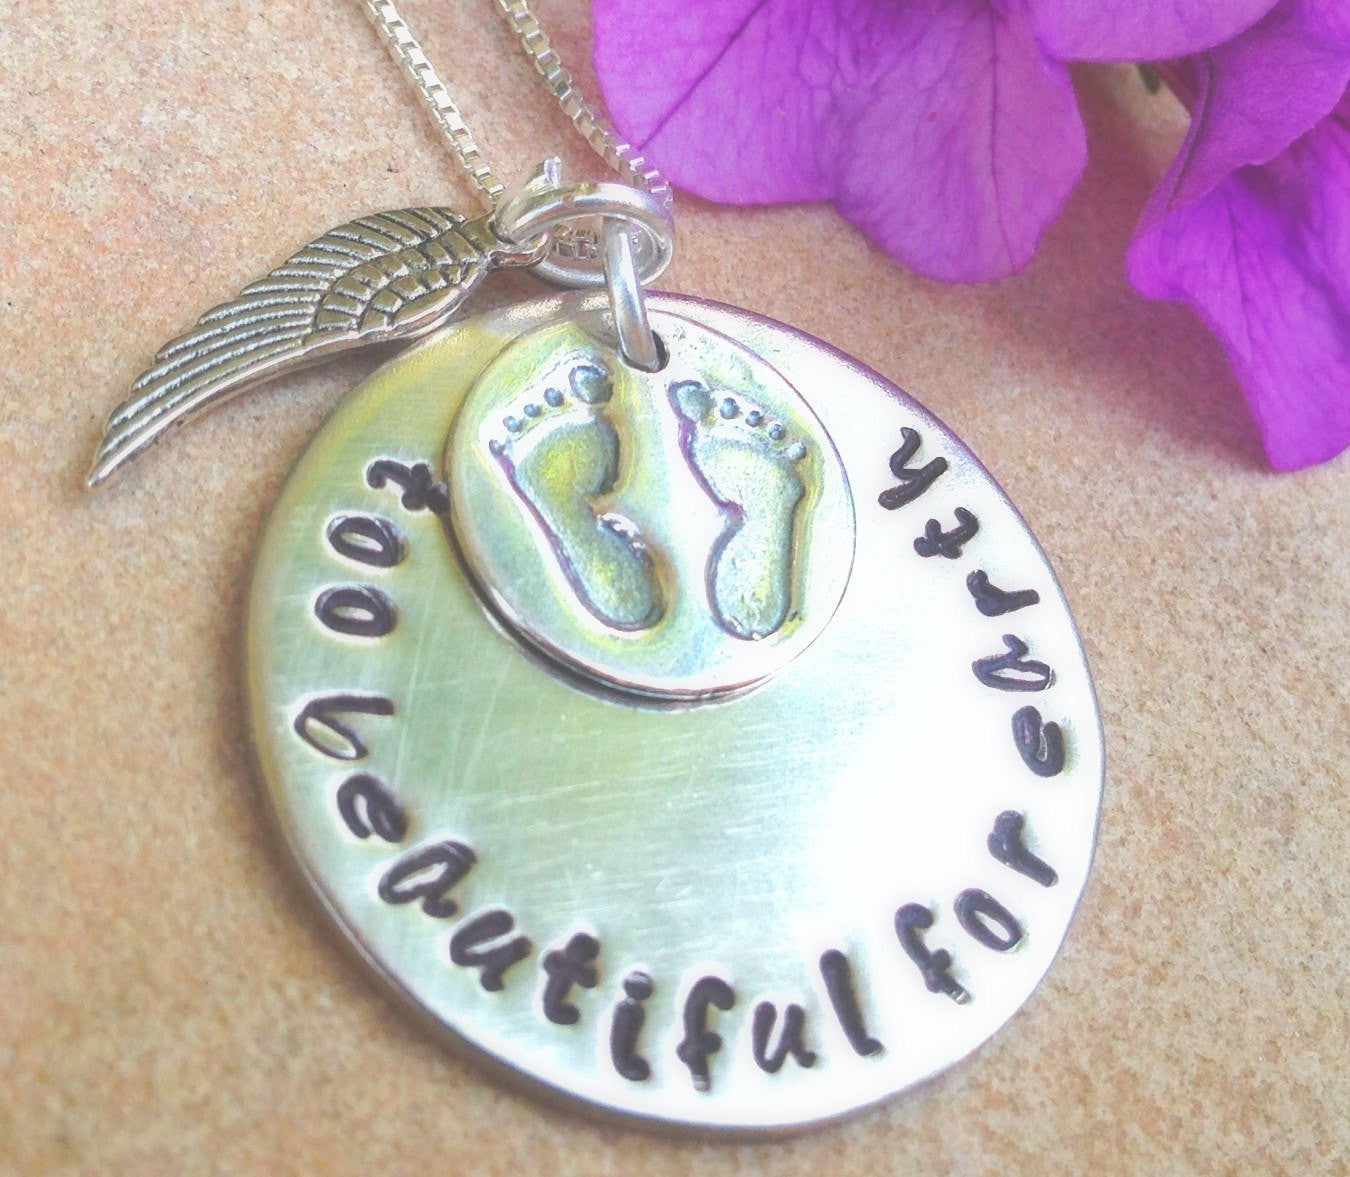 Personalized Necklace, Hand Stamped, too beautiful for earth, baby memorial, memorial necklace, loss of baby, natashaaloha, sympathy gift - Natashaaloha, jewelry, bracelets, necklace, keychains, fishing lures, gifts for men, charms, personalized, 